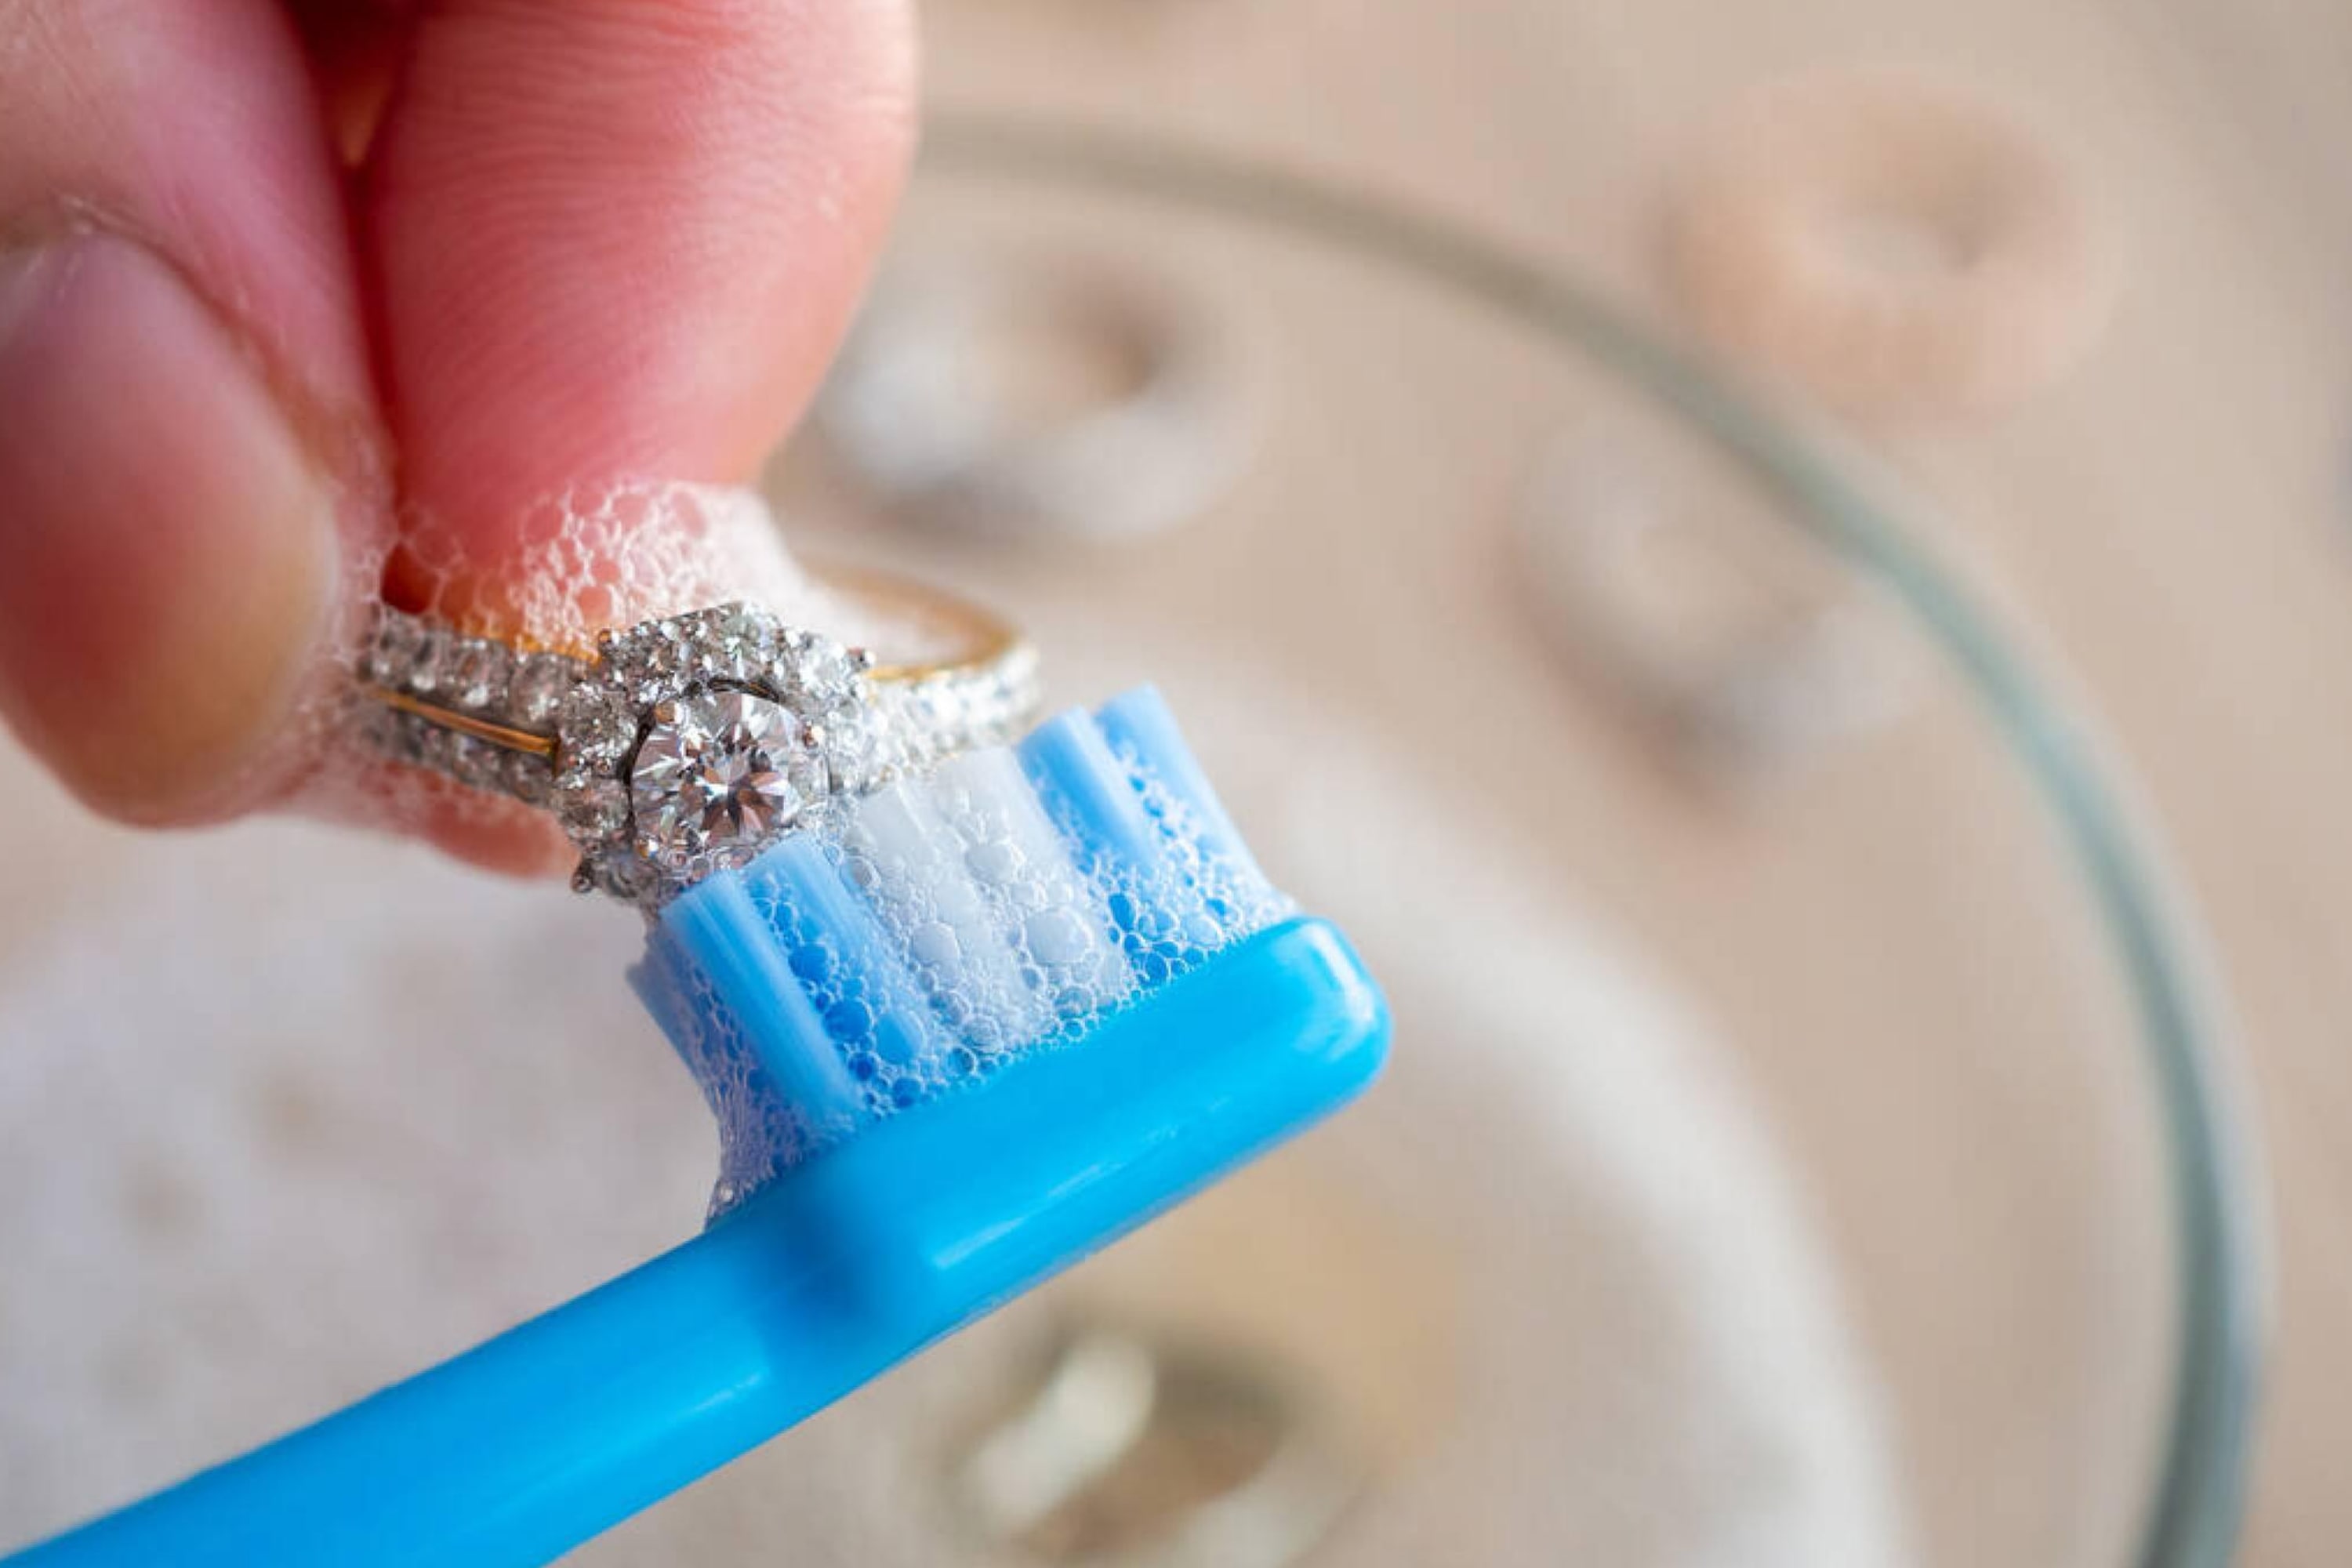 Wash Your Stainless Steel Jewelry With Soap and Water